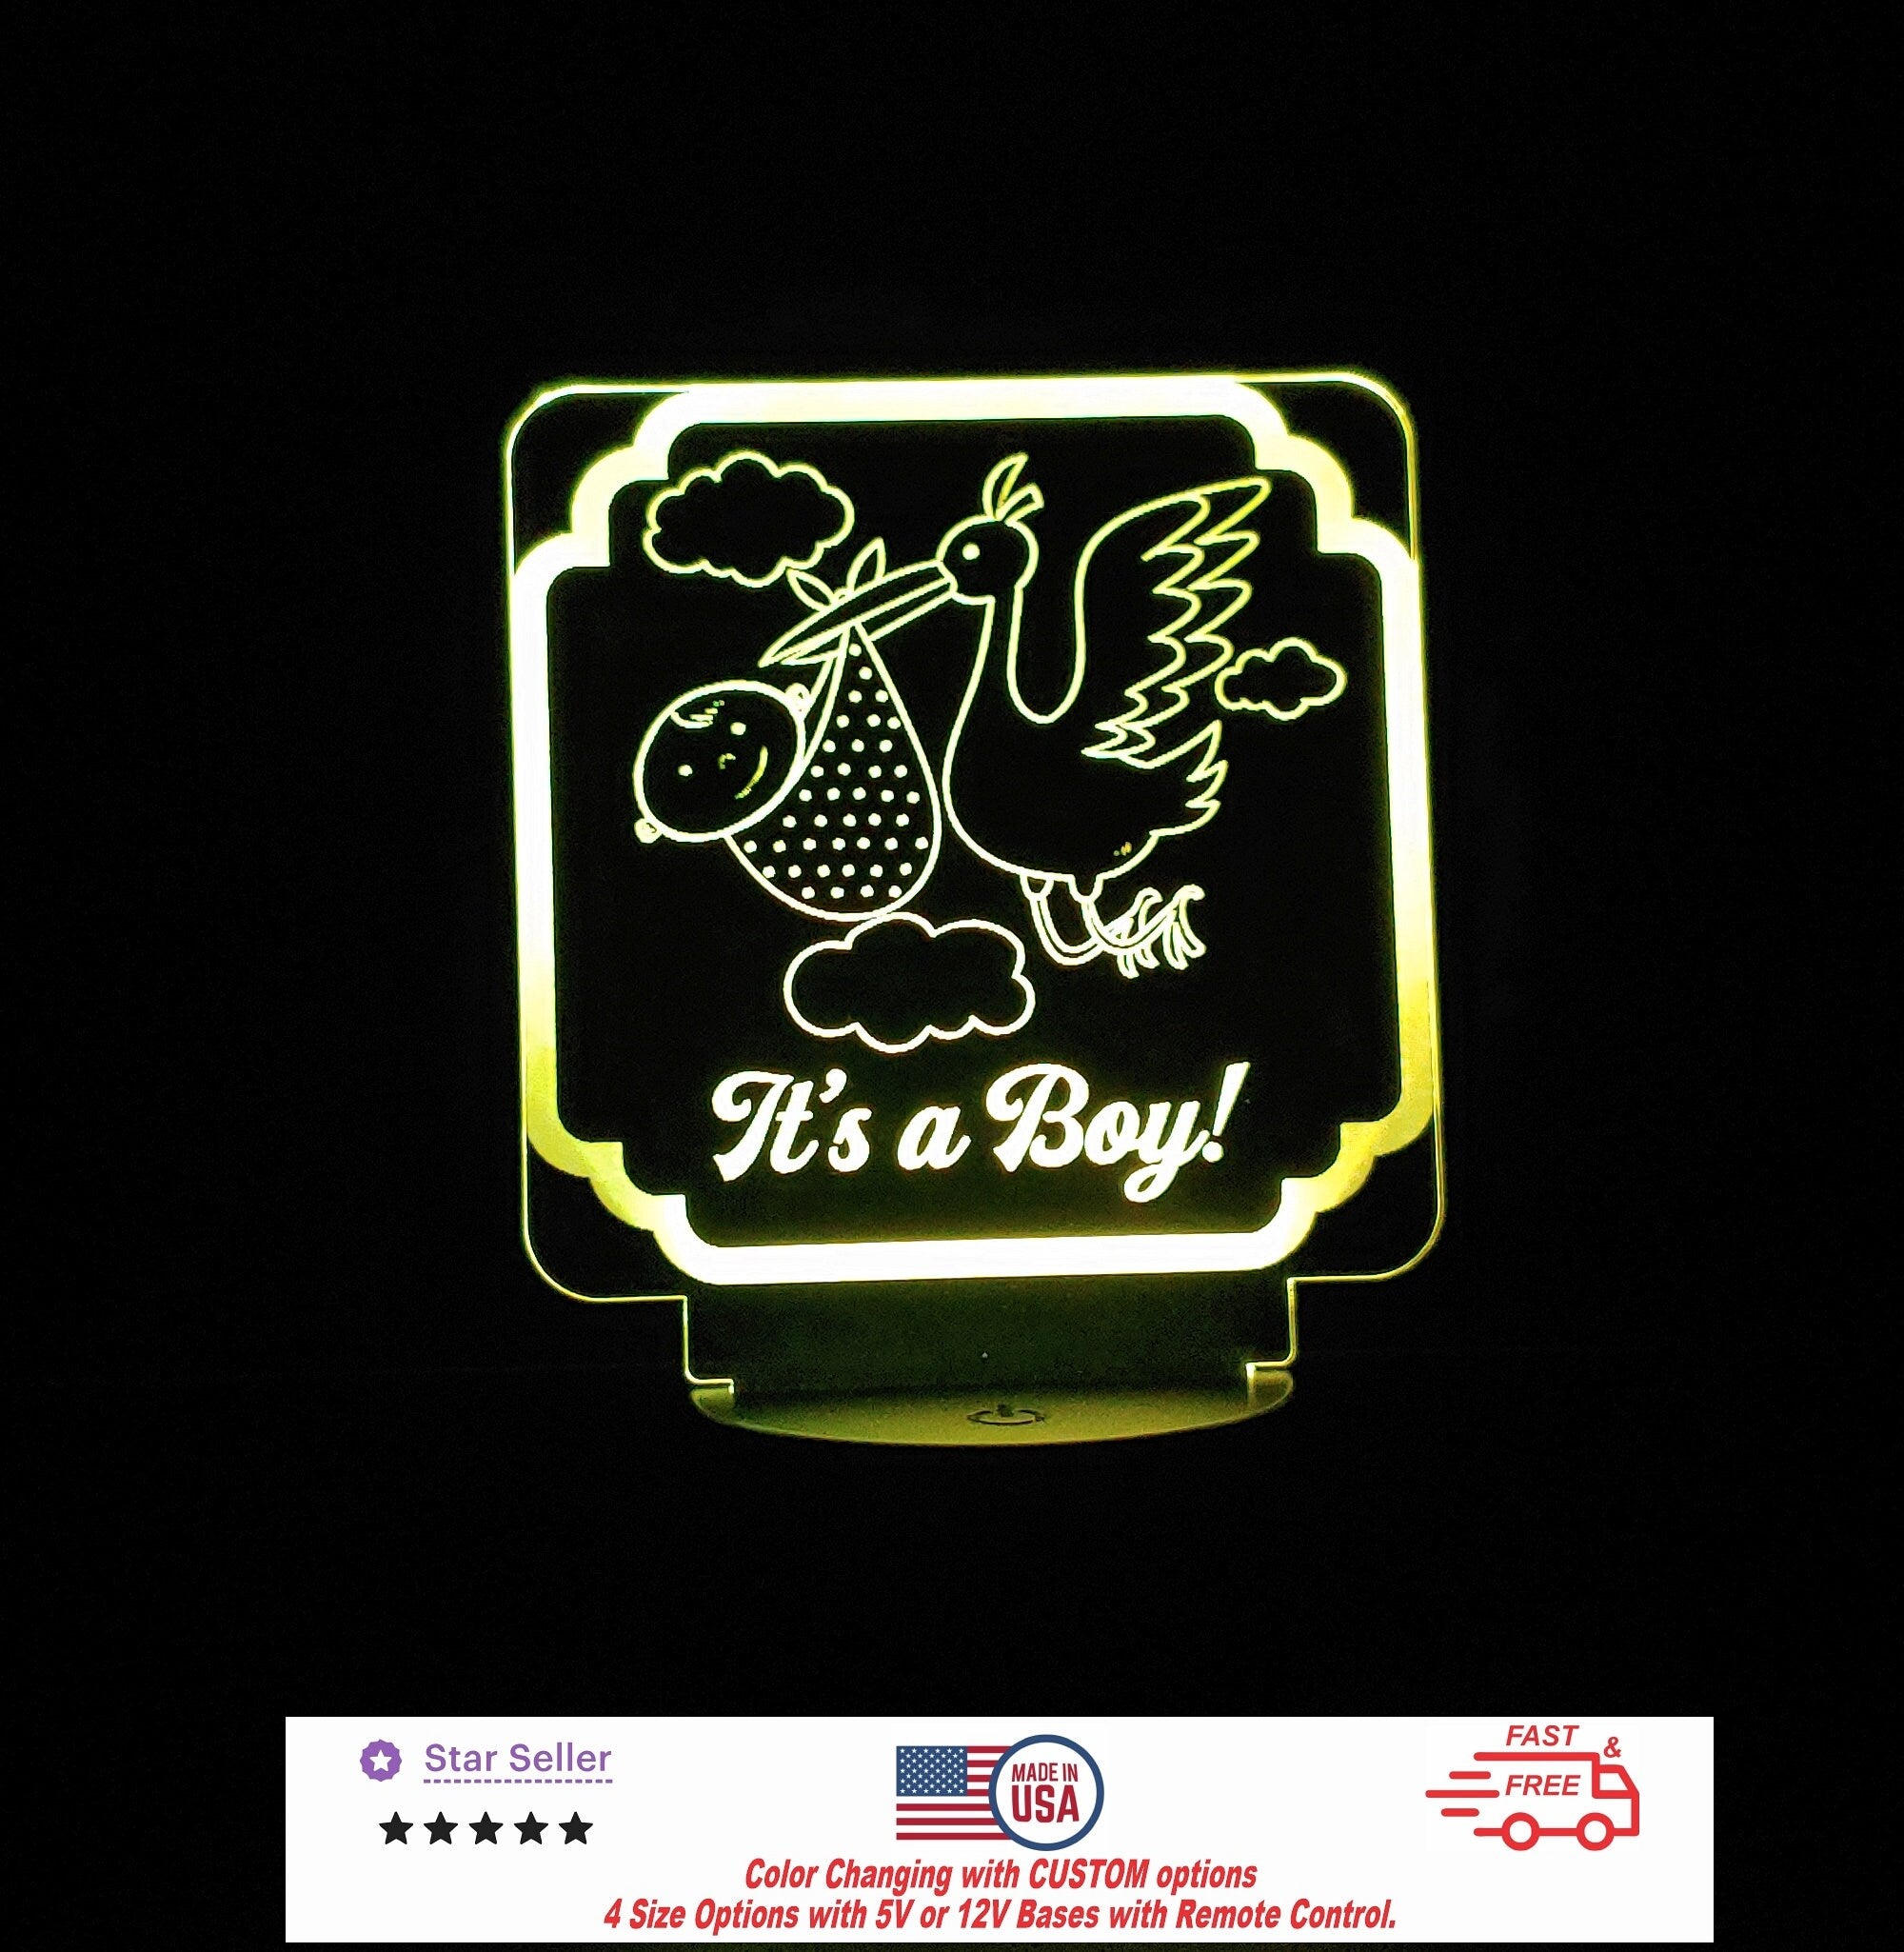 Custom Baby Shower Sign Personalized LED Night Light - Neon sign, Room Decor, Party Enhancer, Nursery, Kids' Room, Free Shipping Made in USA